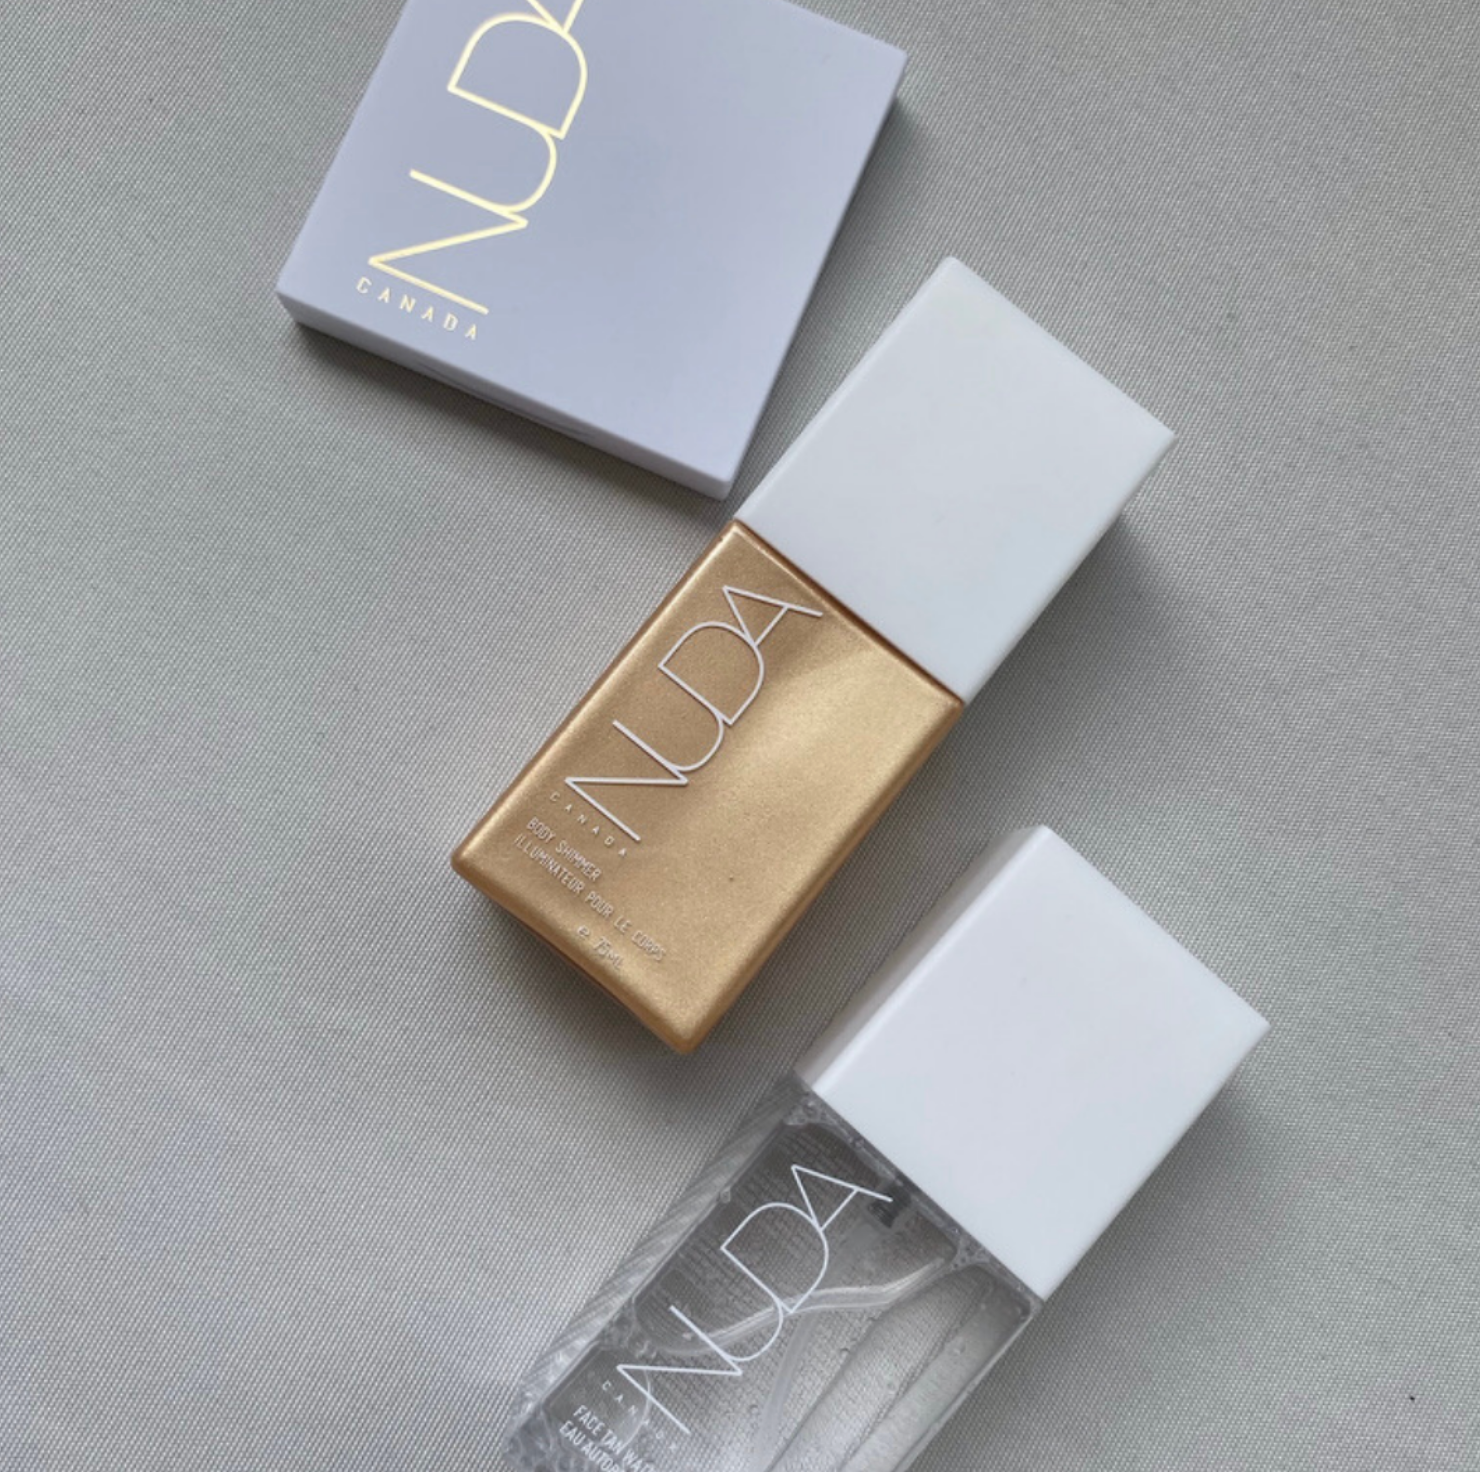 How to Use the Nuda Self-Tan Line for the Perfect Summer Glow